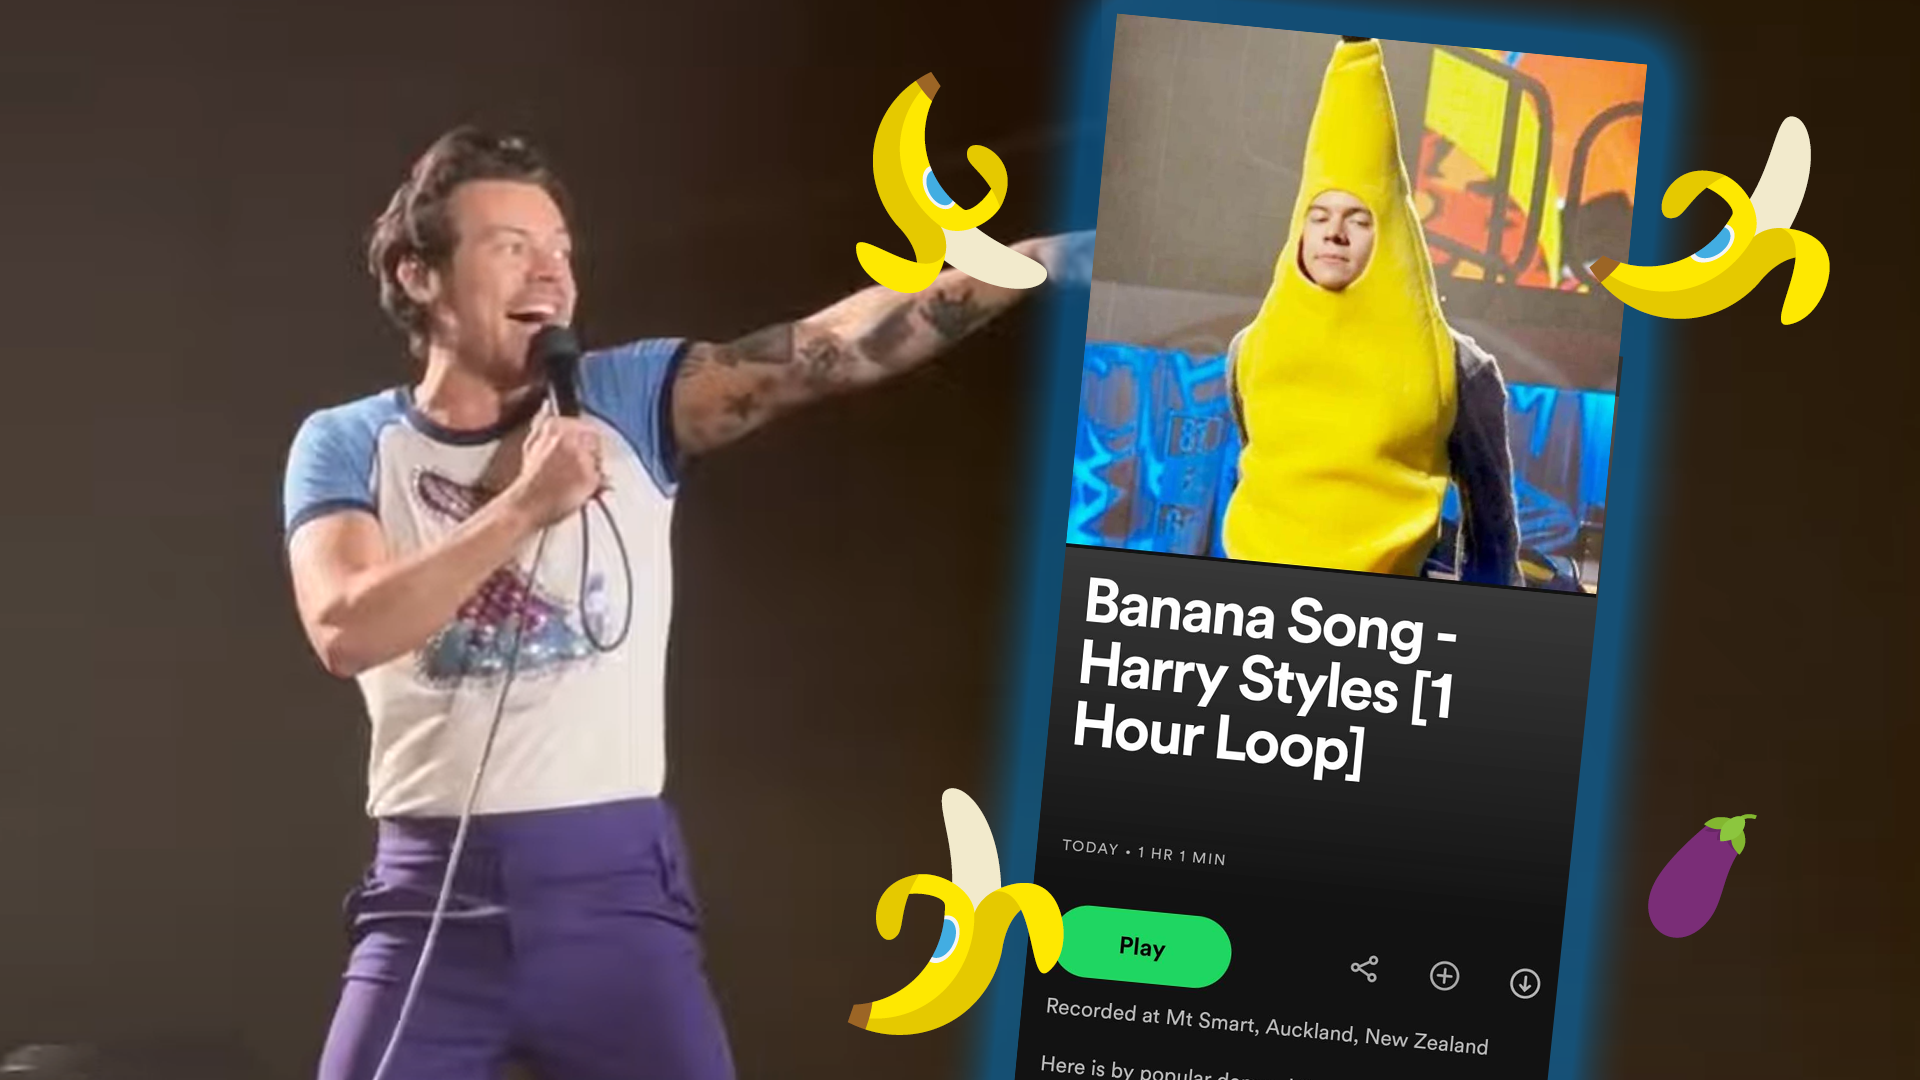 Love Harry Styles' 'Banana' song? We made a 1-hour loop of it